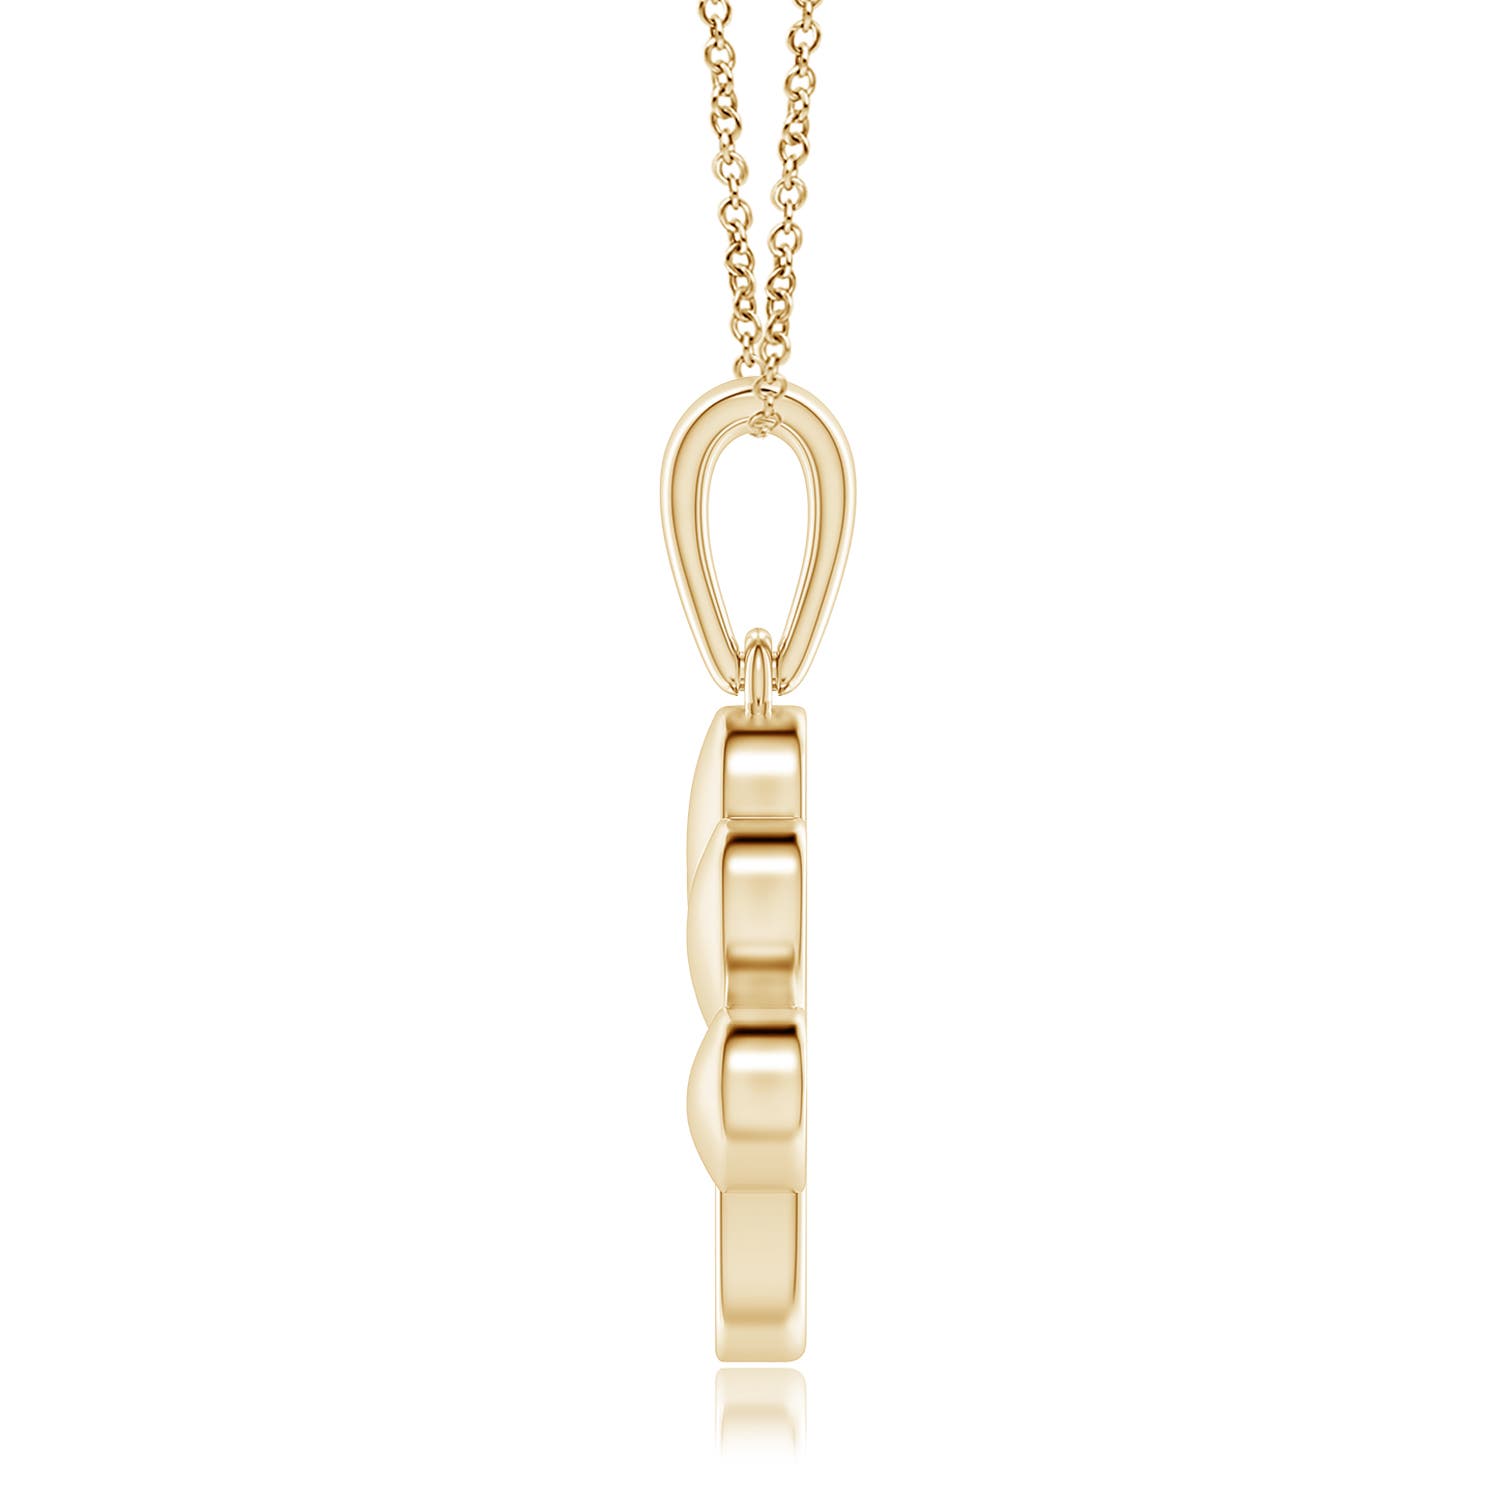 K, I3 / 0.2 CT / 14 KT Yellow Gold